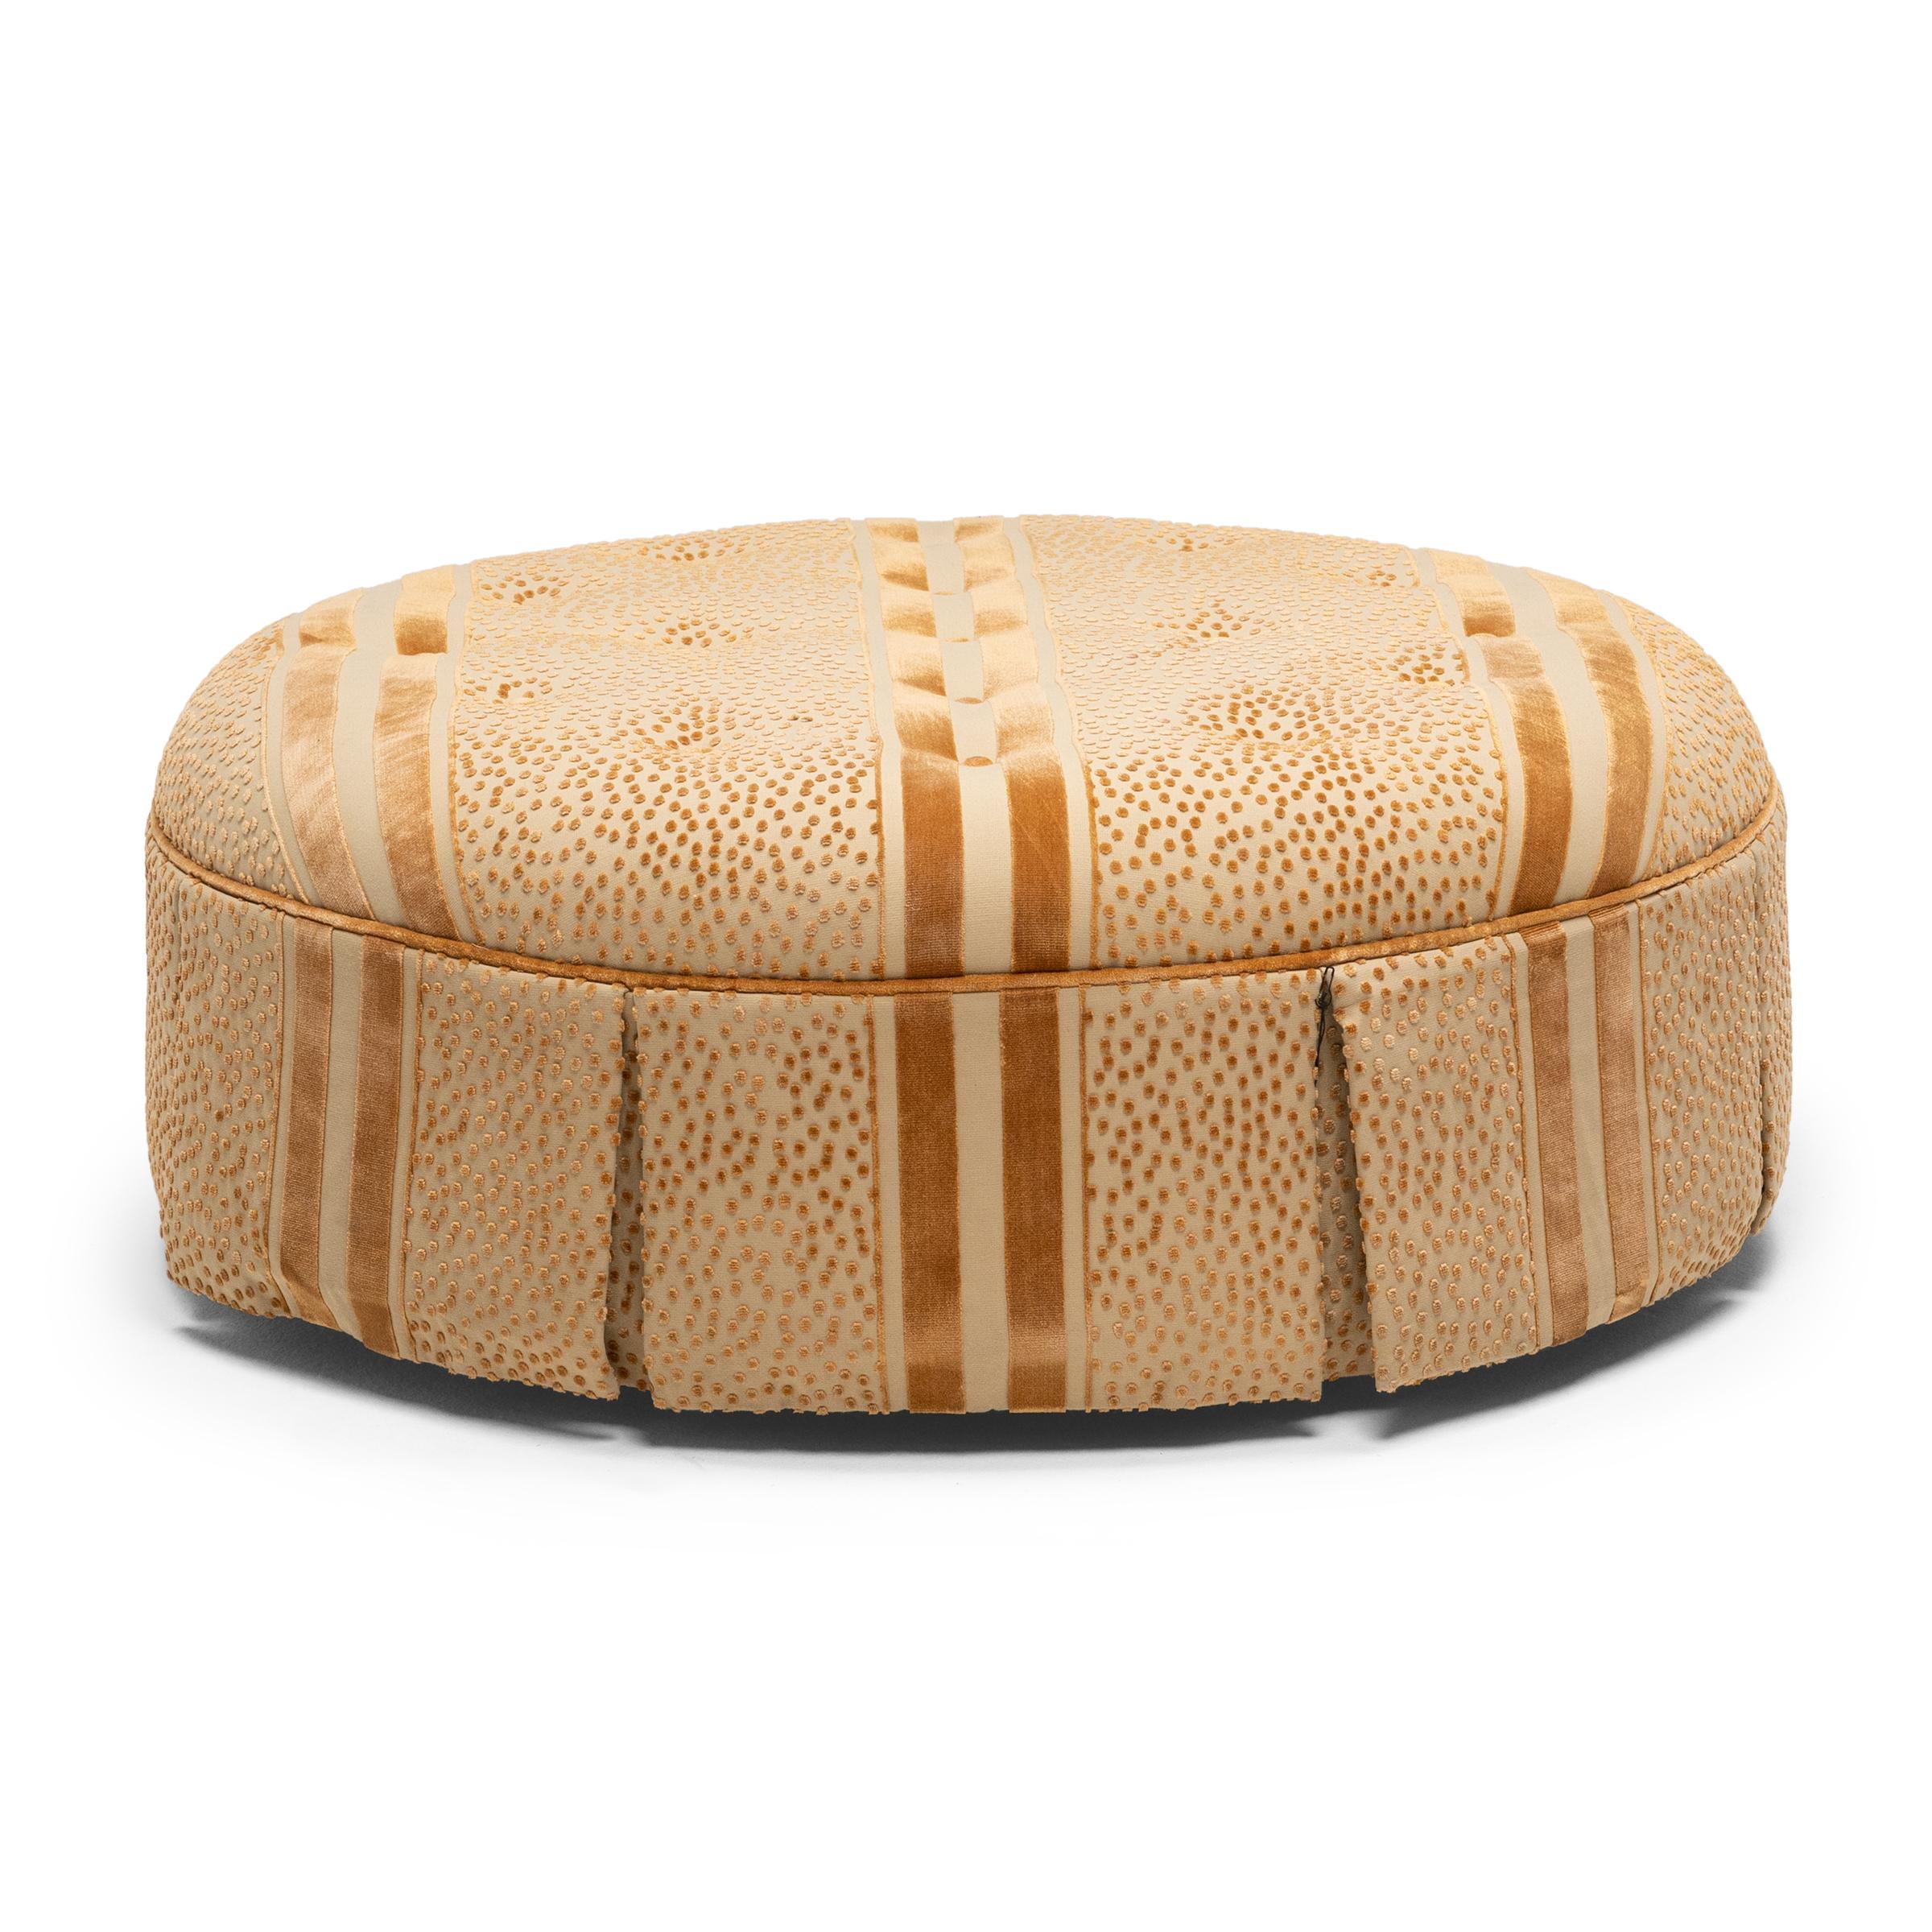 This large round ottoman is enveloped in opulent cut velvet upholstery embellished with a dotted pattern reminiscent of leopard print and bold lines that flow seamlessly across the top and sides. The cushioned top has a tufted design held in place